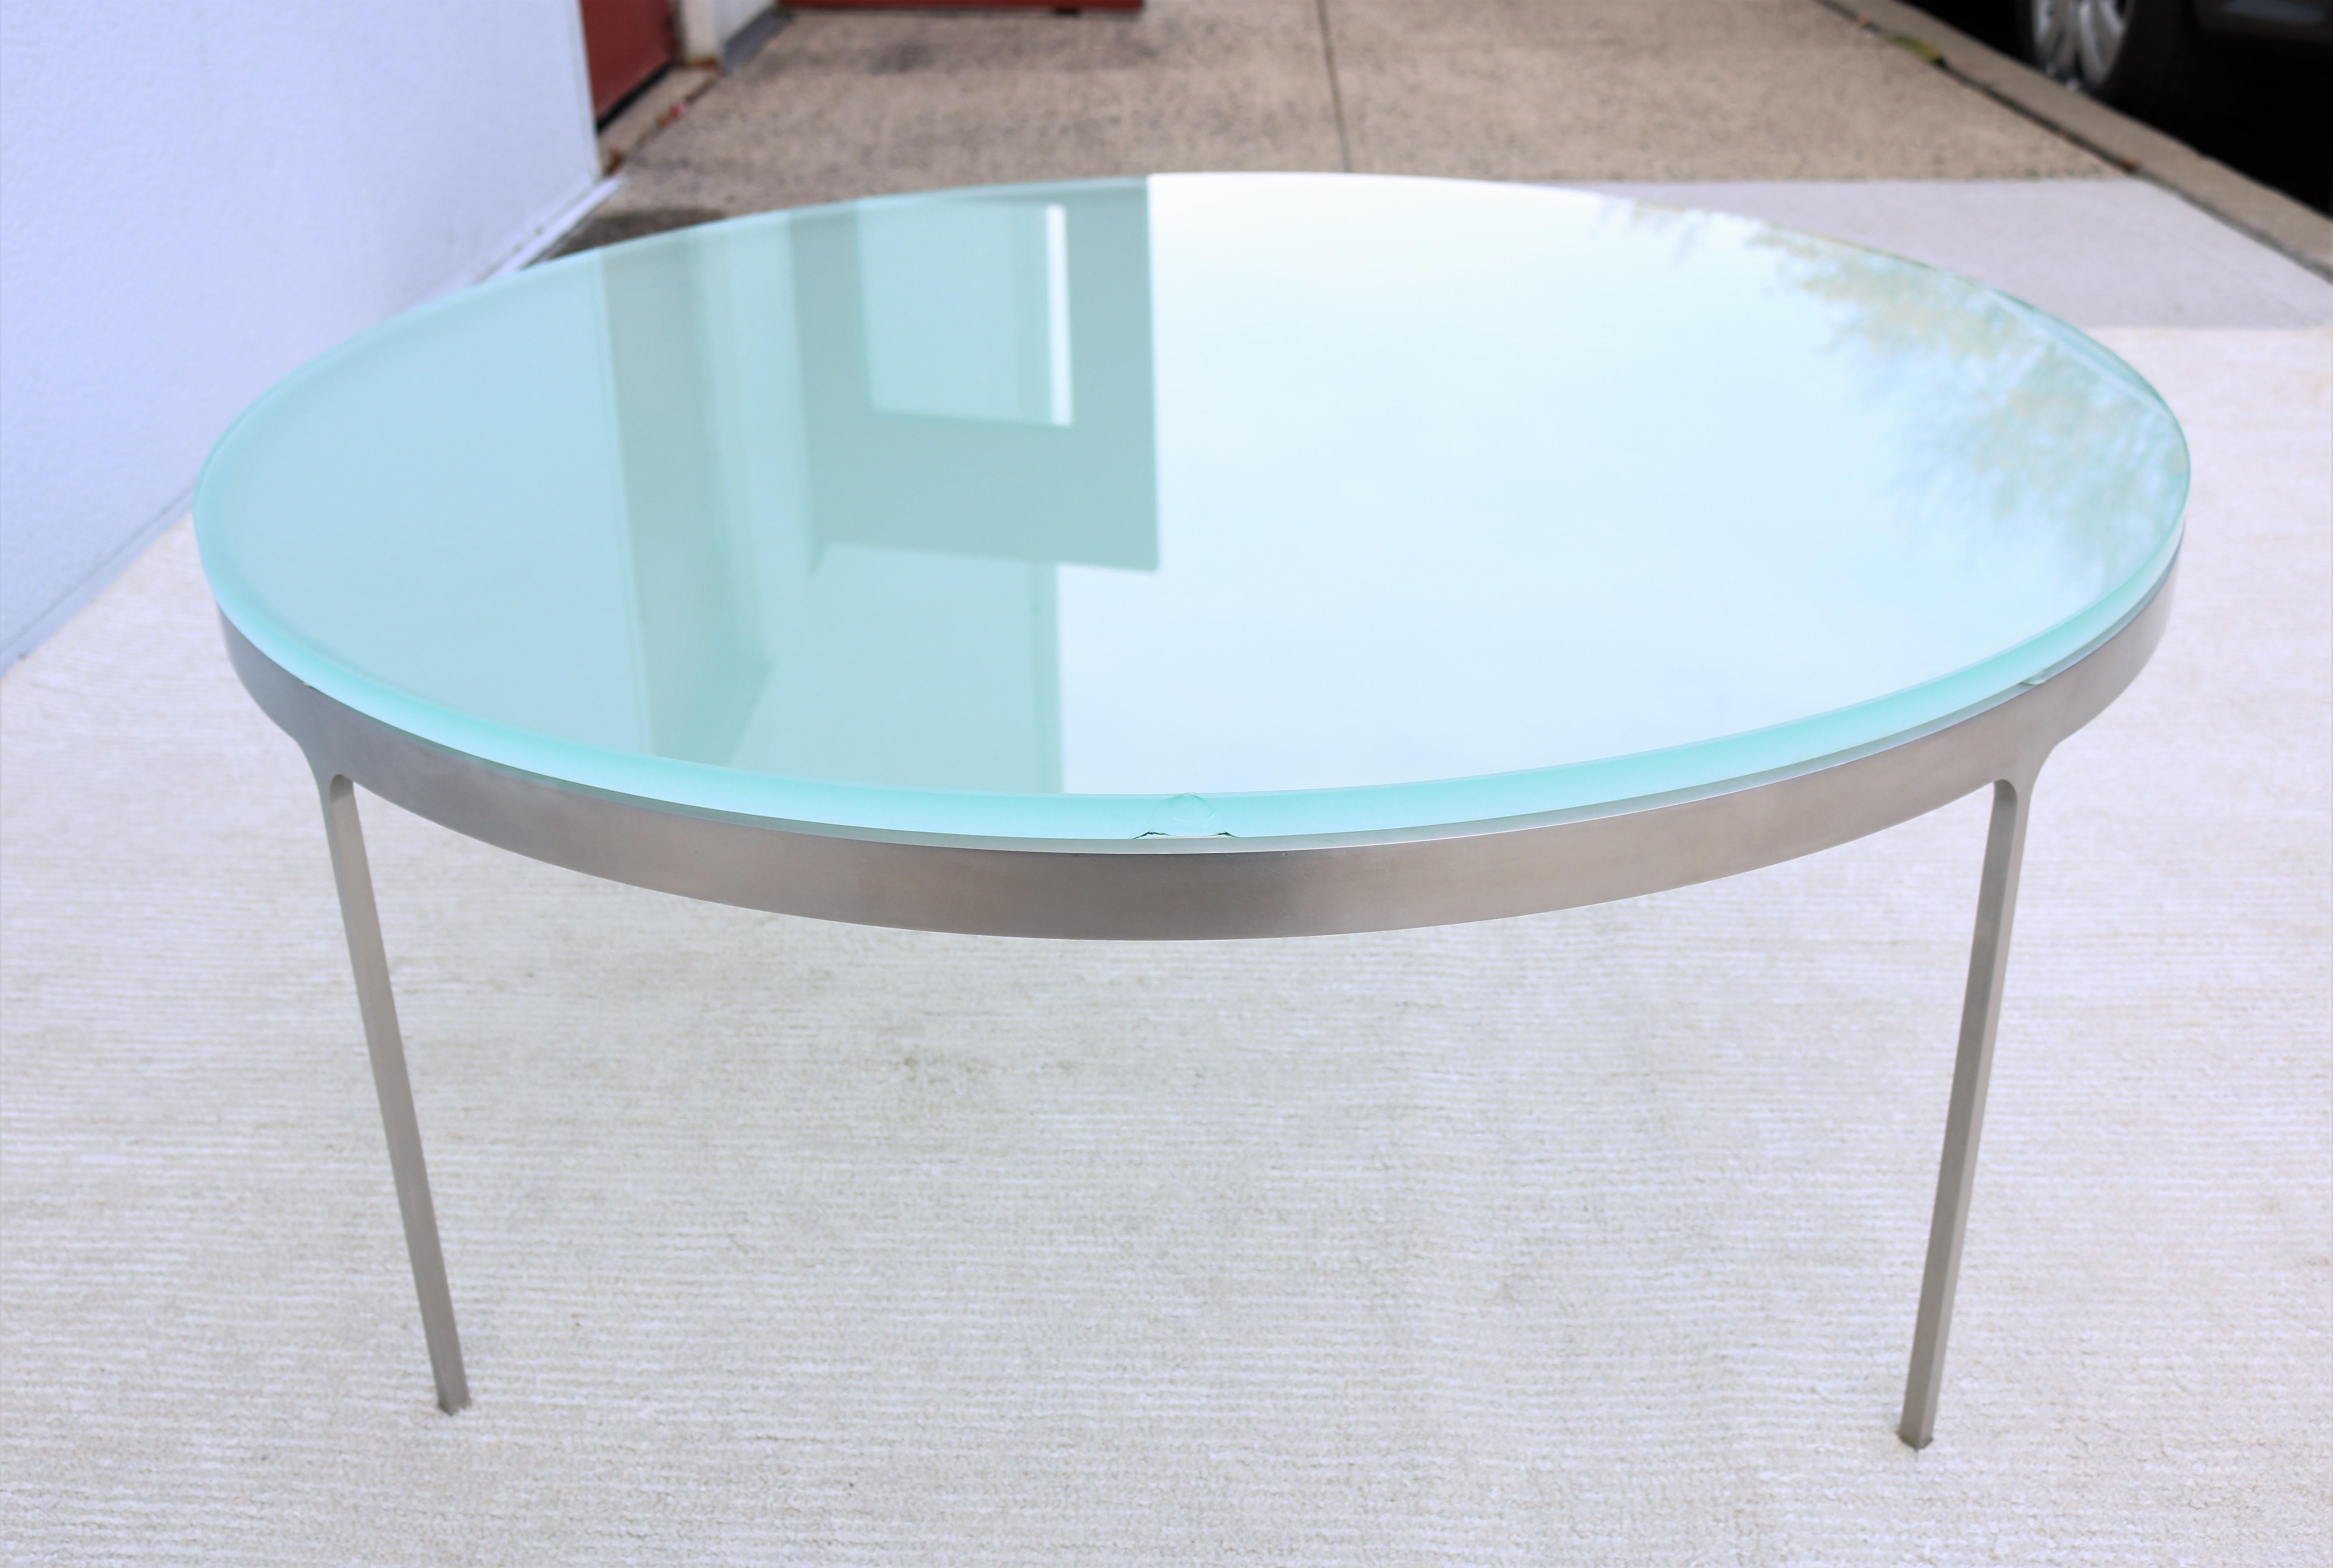 Vintage Minimalist Nicos Zographos Round Glass and Stainless-Steel Coffee Table For Sale 6